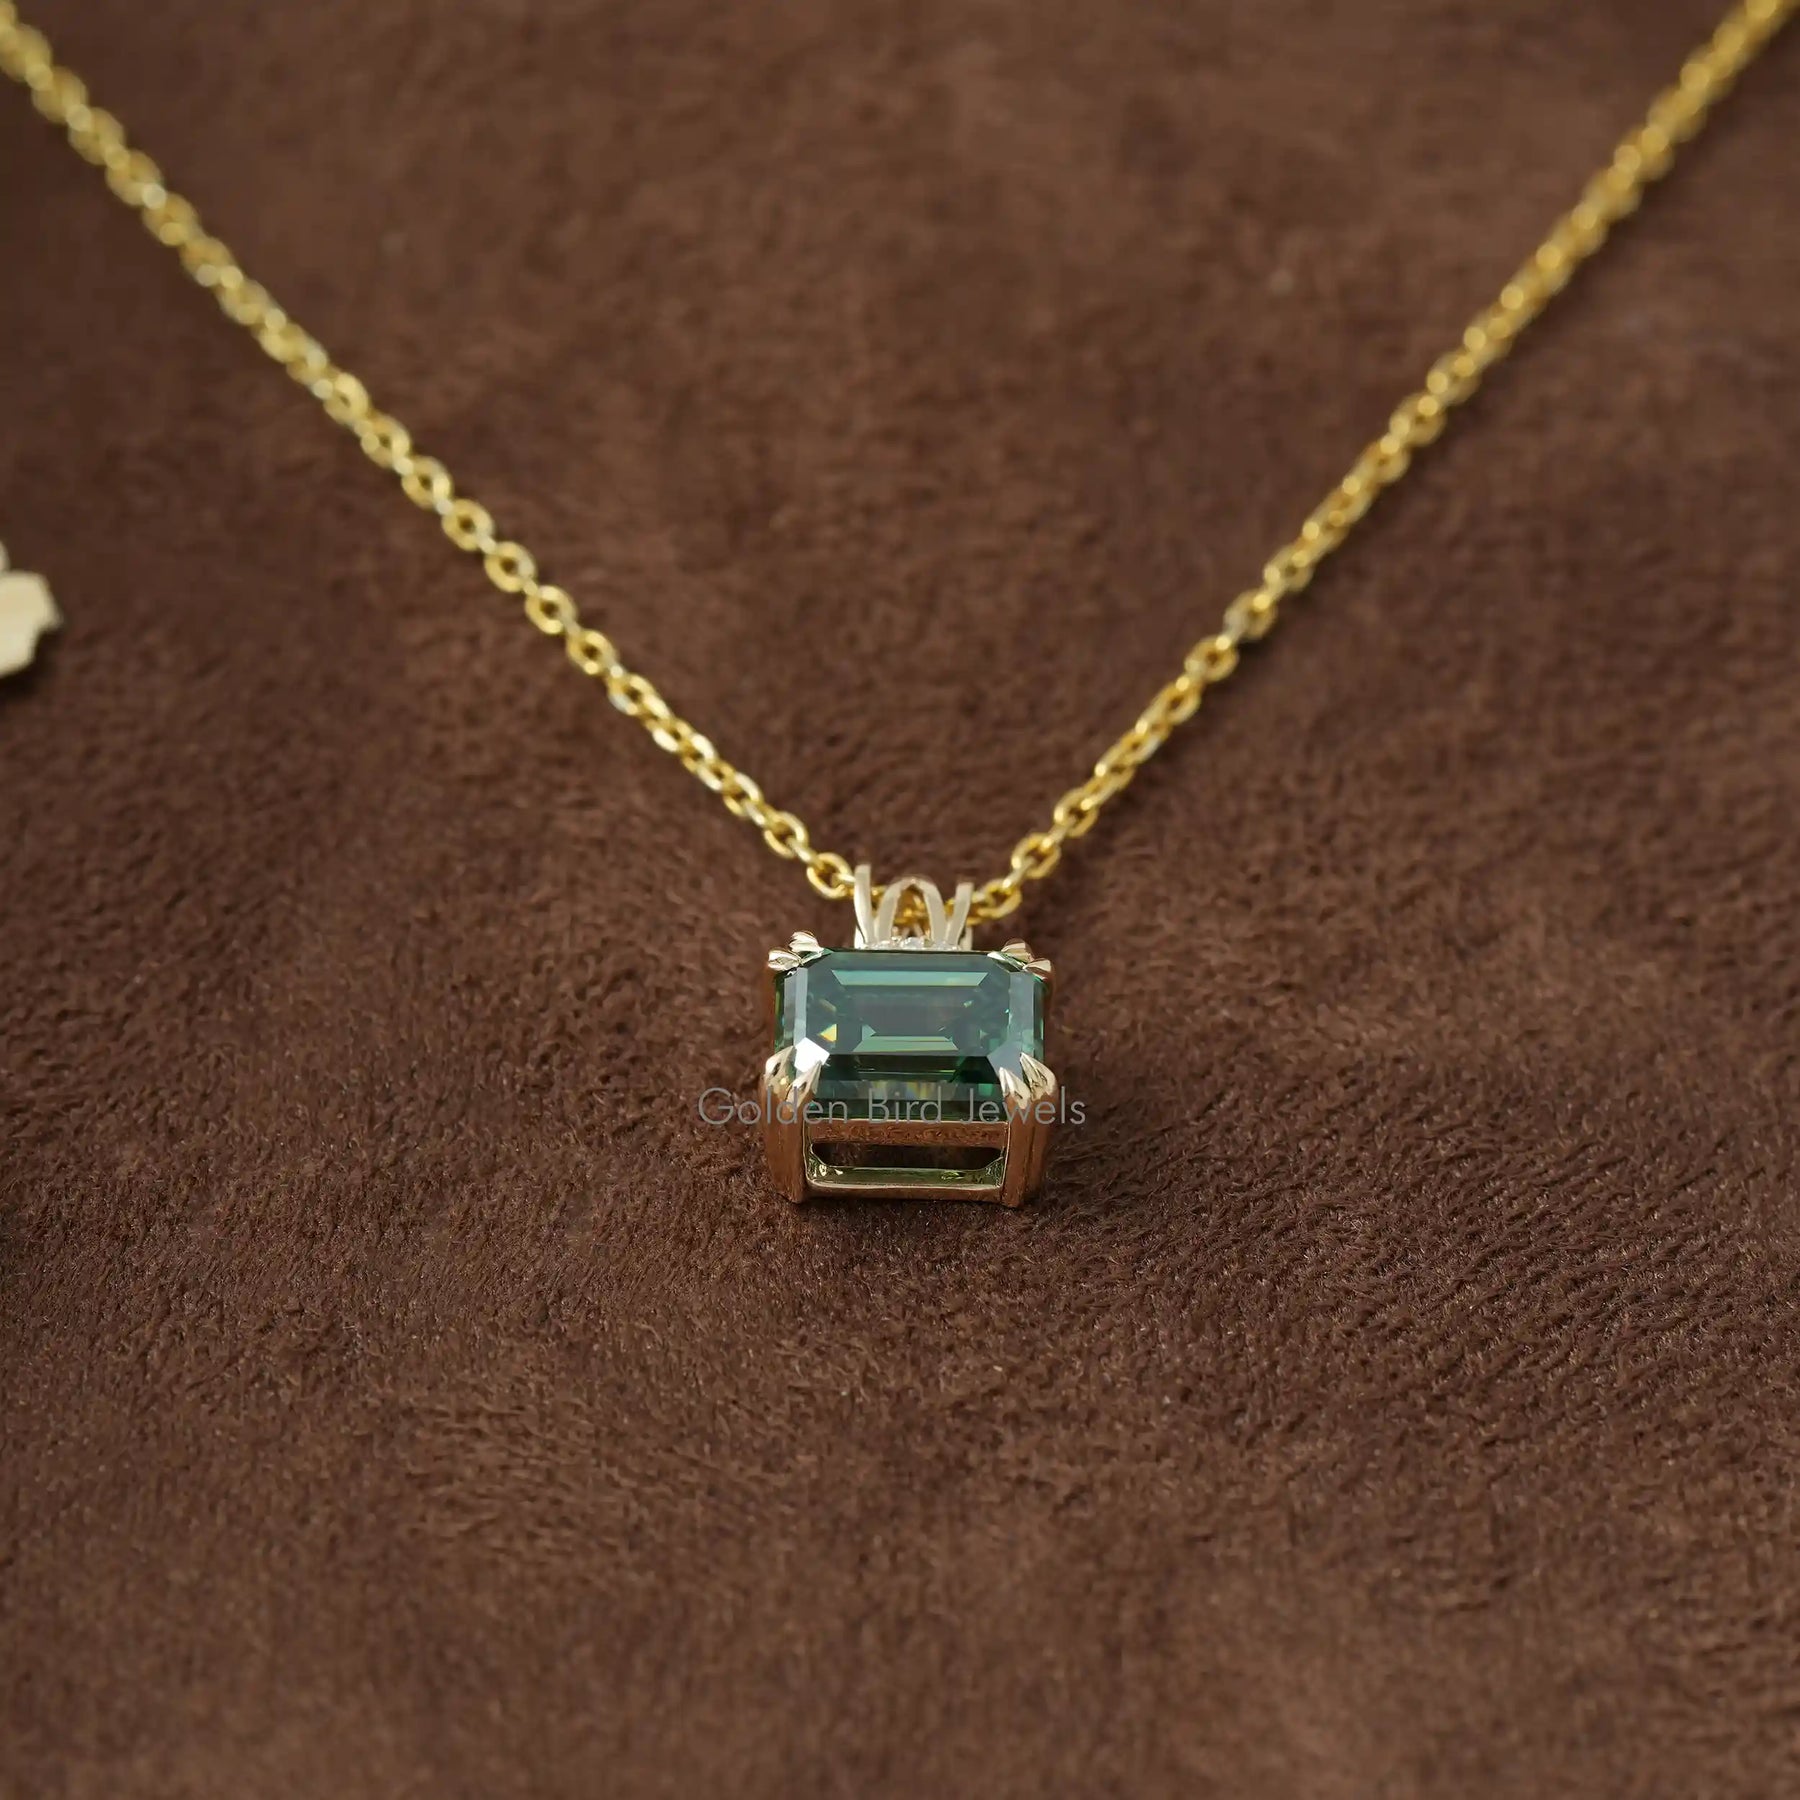 [Front view of moissanite emerald cut pendant in 14k yellow gold]-[Golden Bird Jewels]